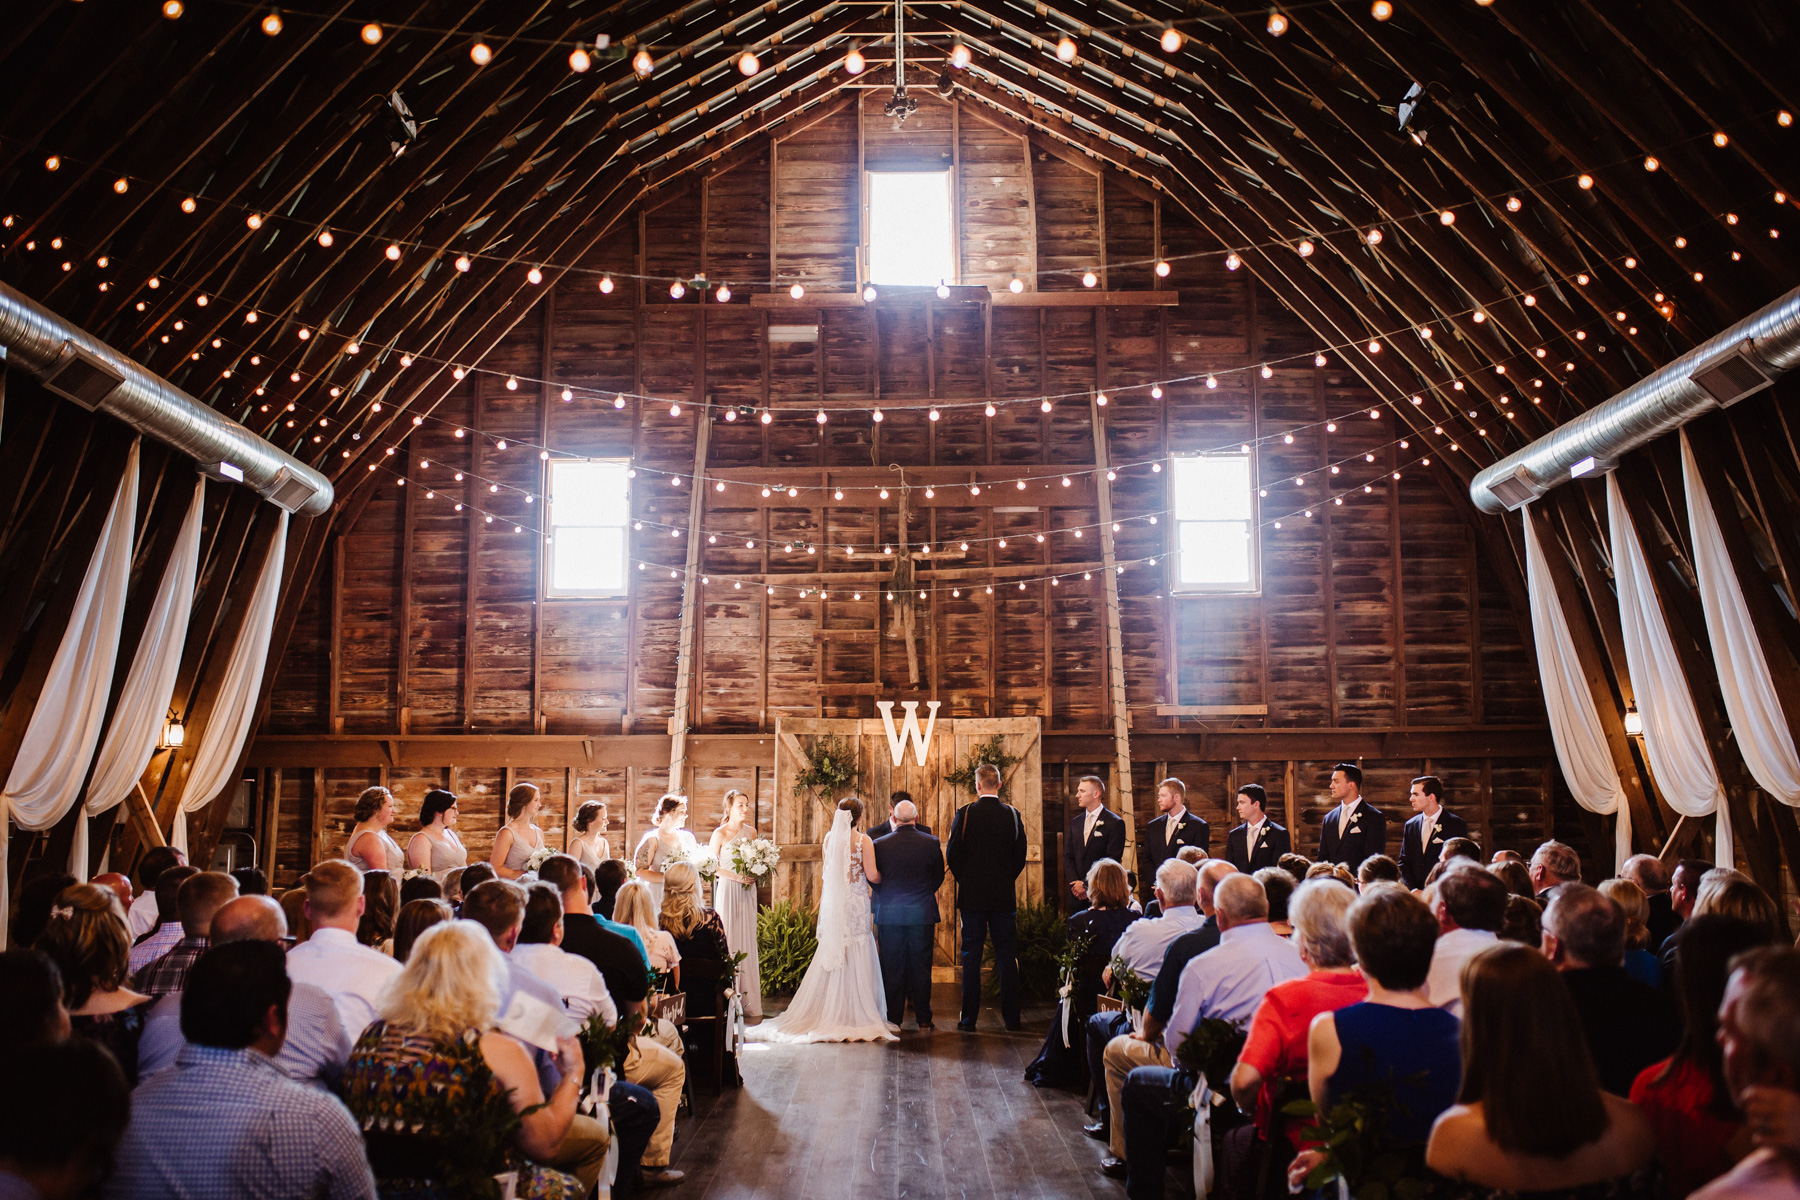 What To Look For In Your Wedding Venue To Get The Most Out Of Your Photos